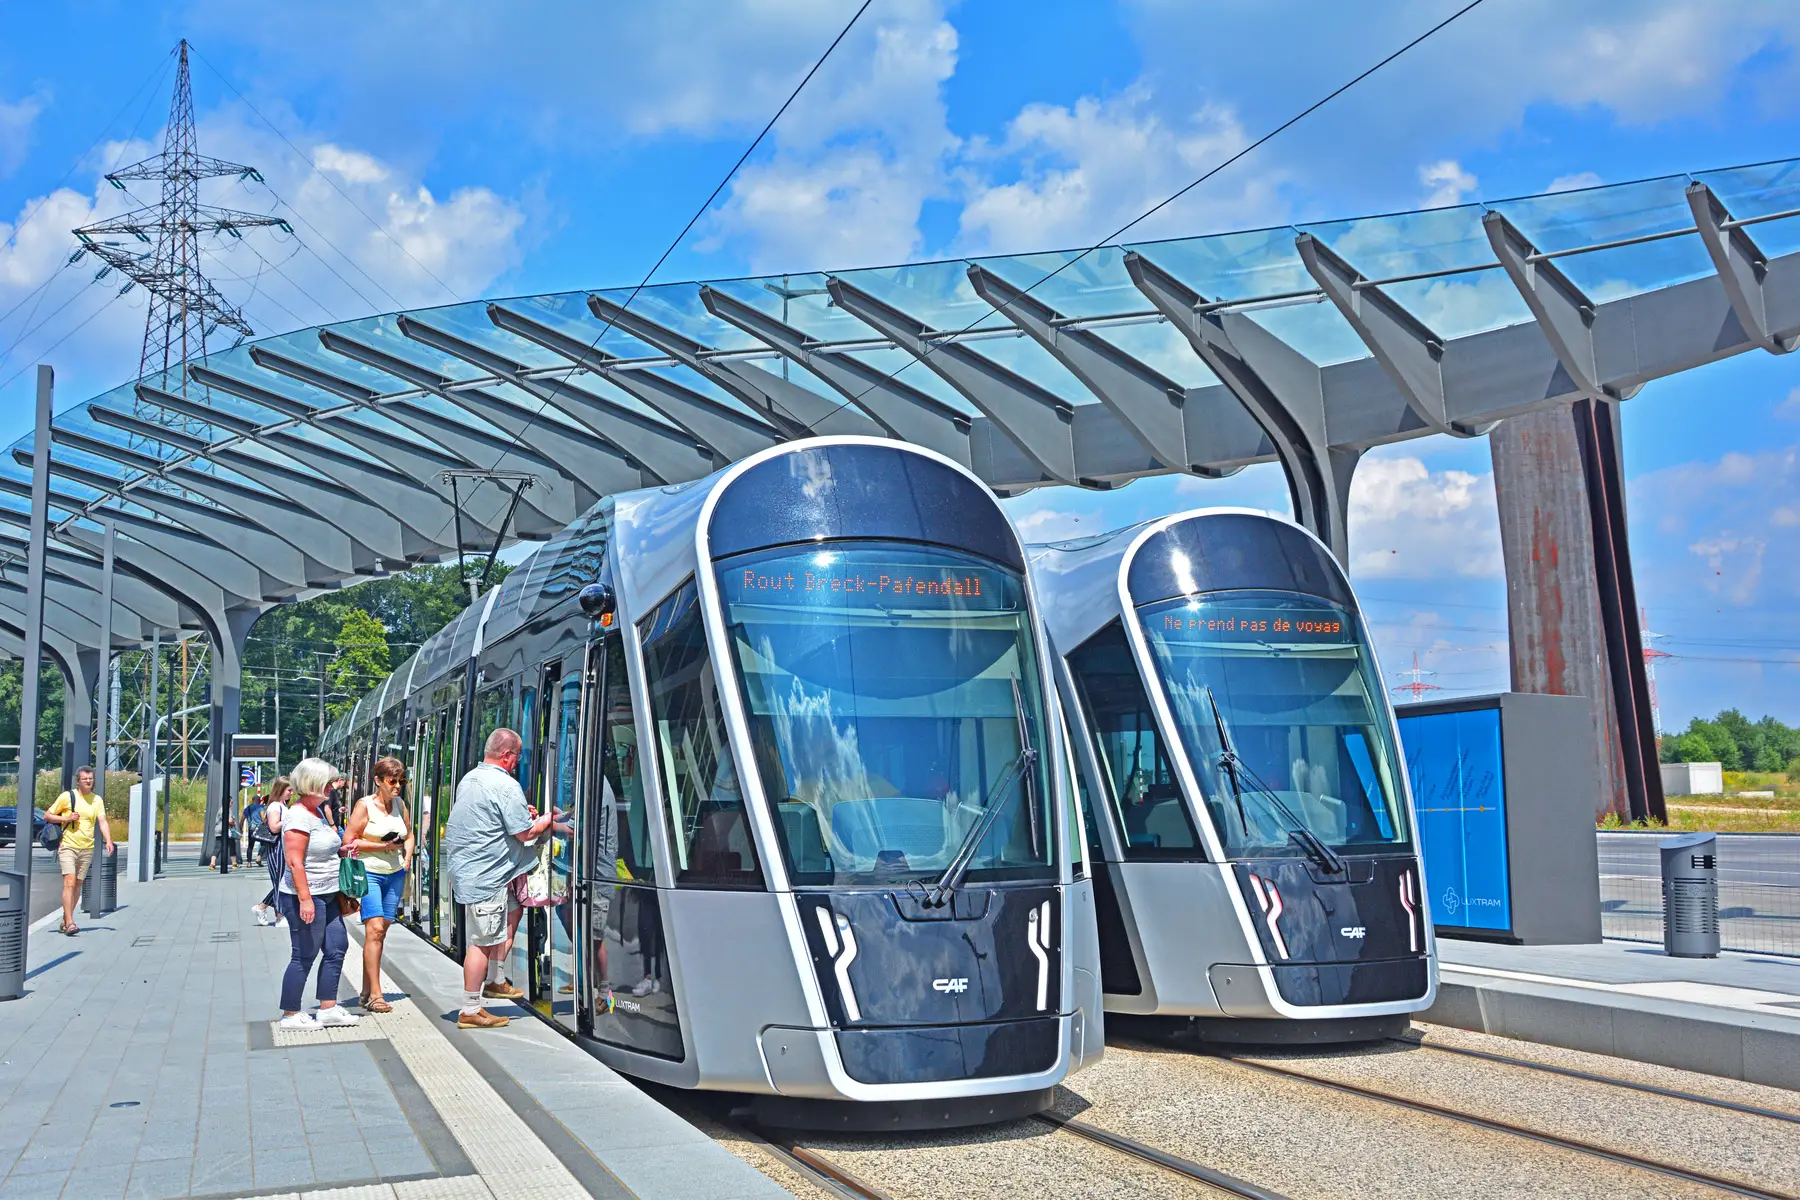 Trams in Luxembourg City